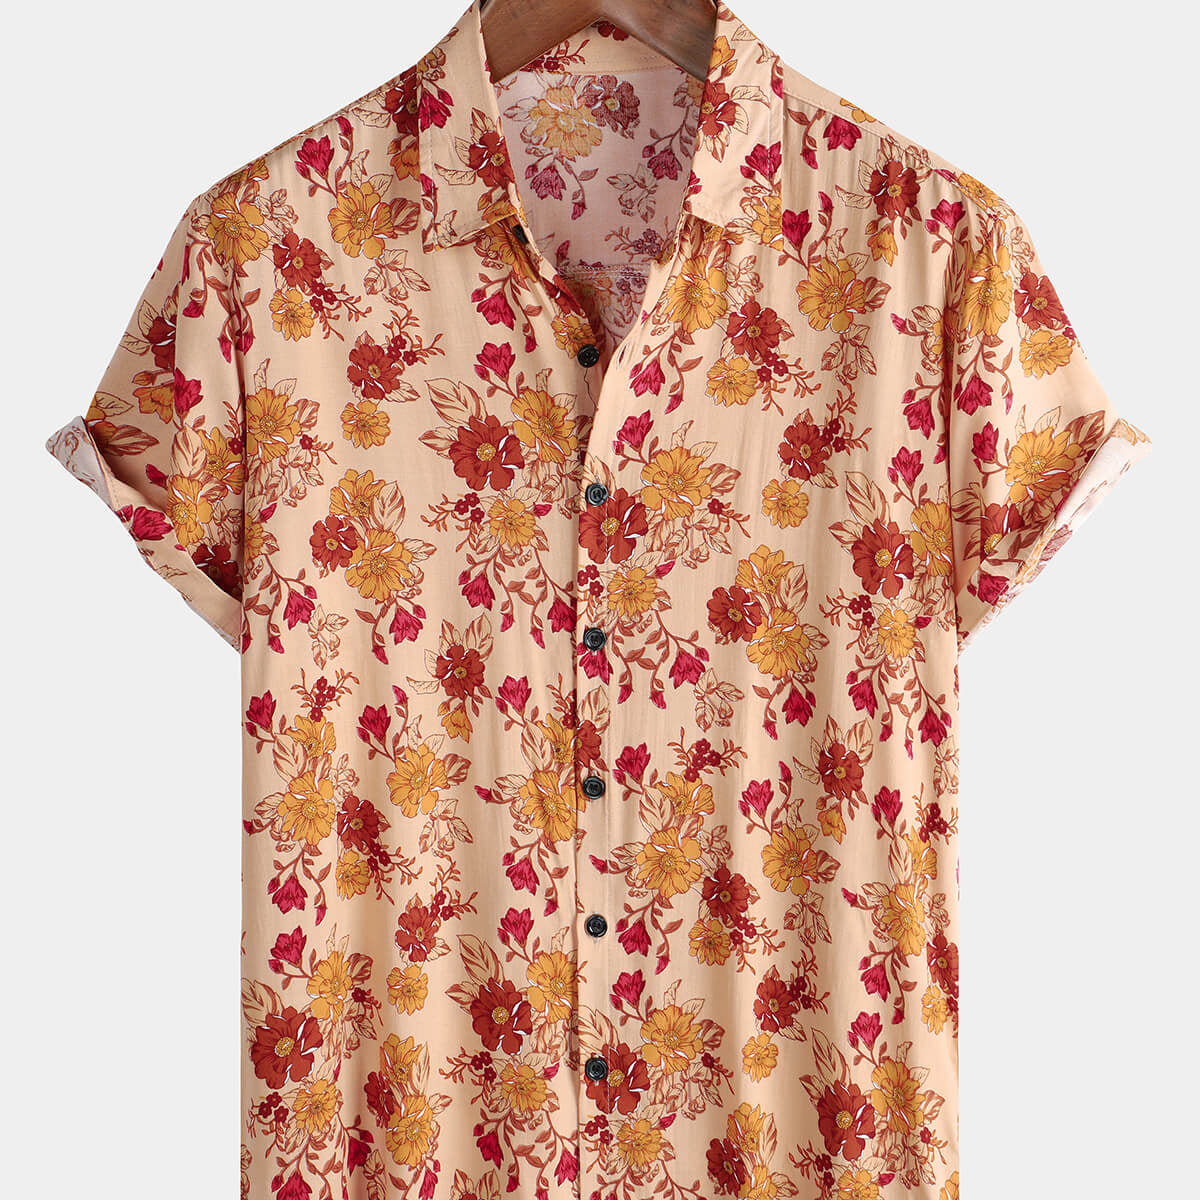 Men's Floral Holiday Casual Vintage Short Sleeve Button Up Shirt